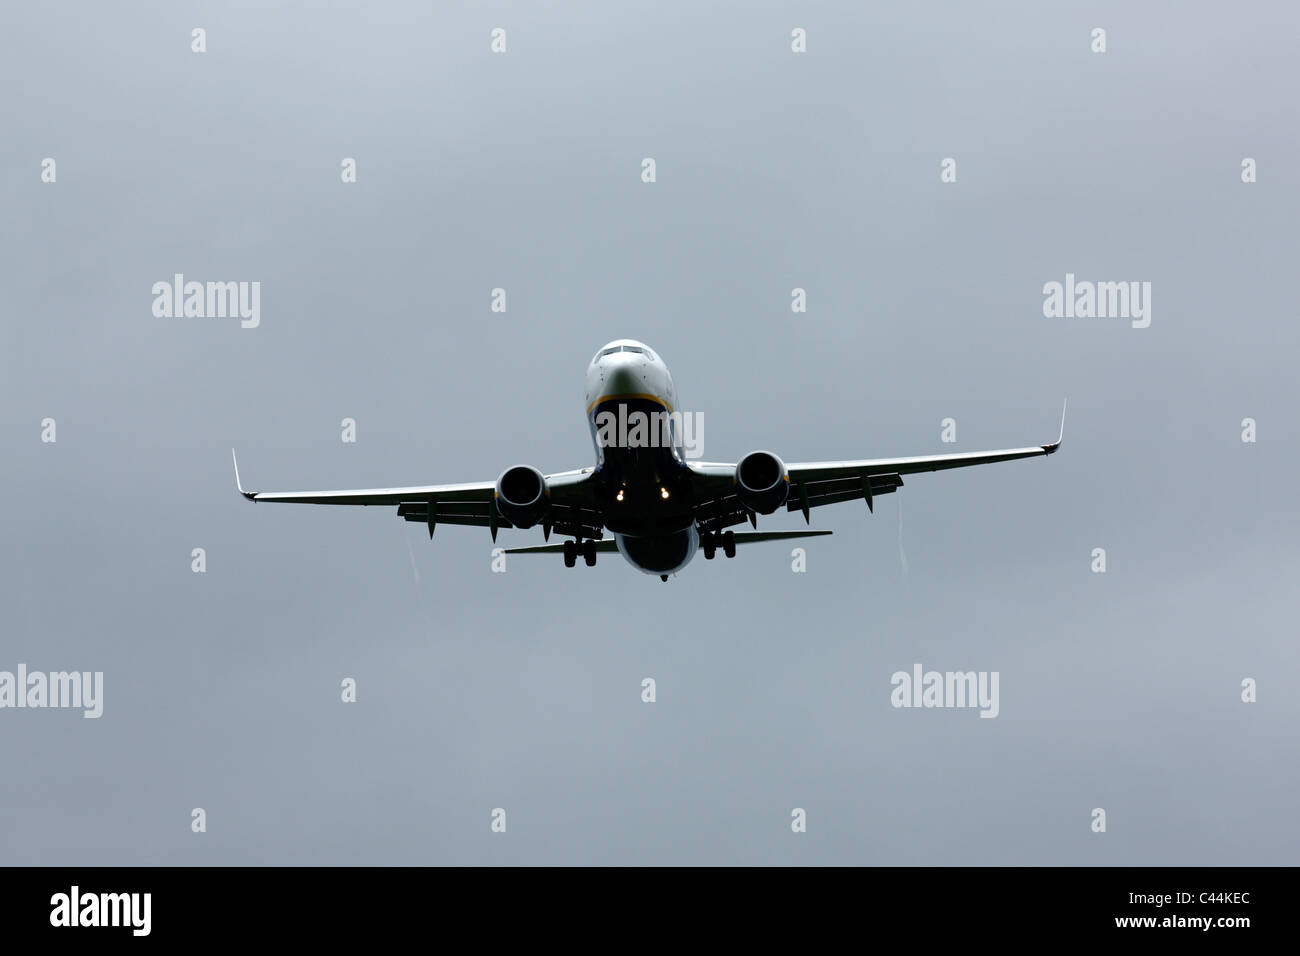 Ryanair Boeing 737 aircraft on final approach to Knock Airport, Republic of Ireland Stock Photo